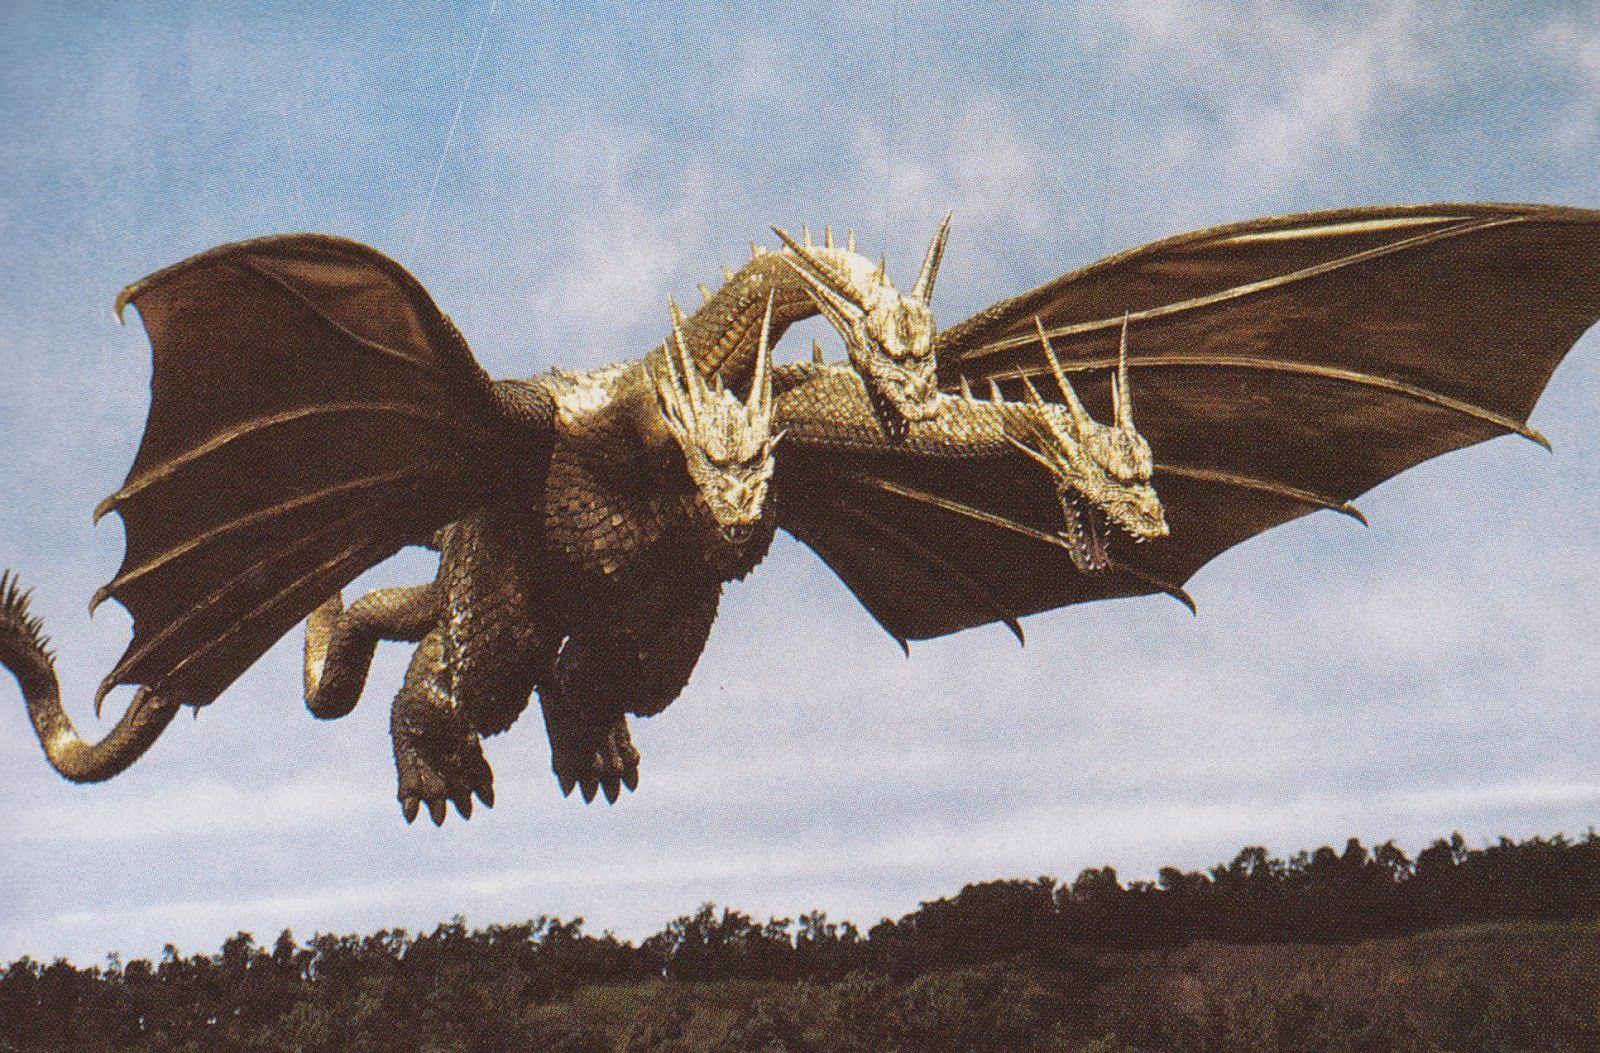 King Ghidorah Wallpaper. today we have more great stills